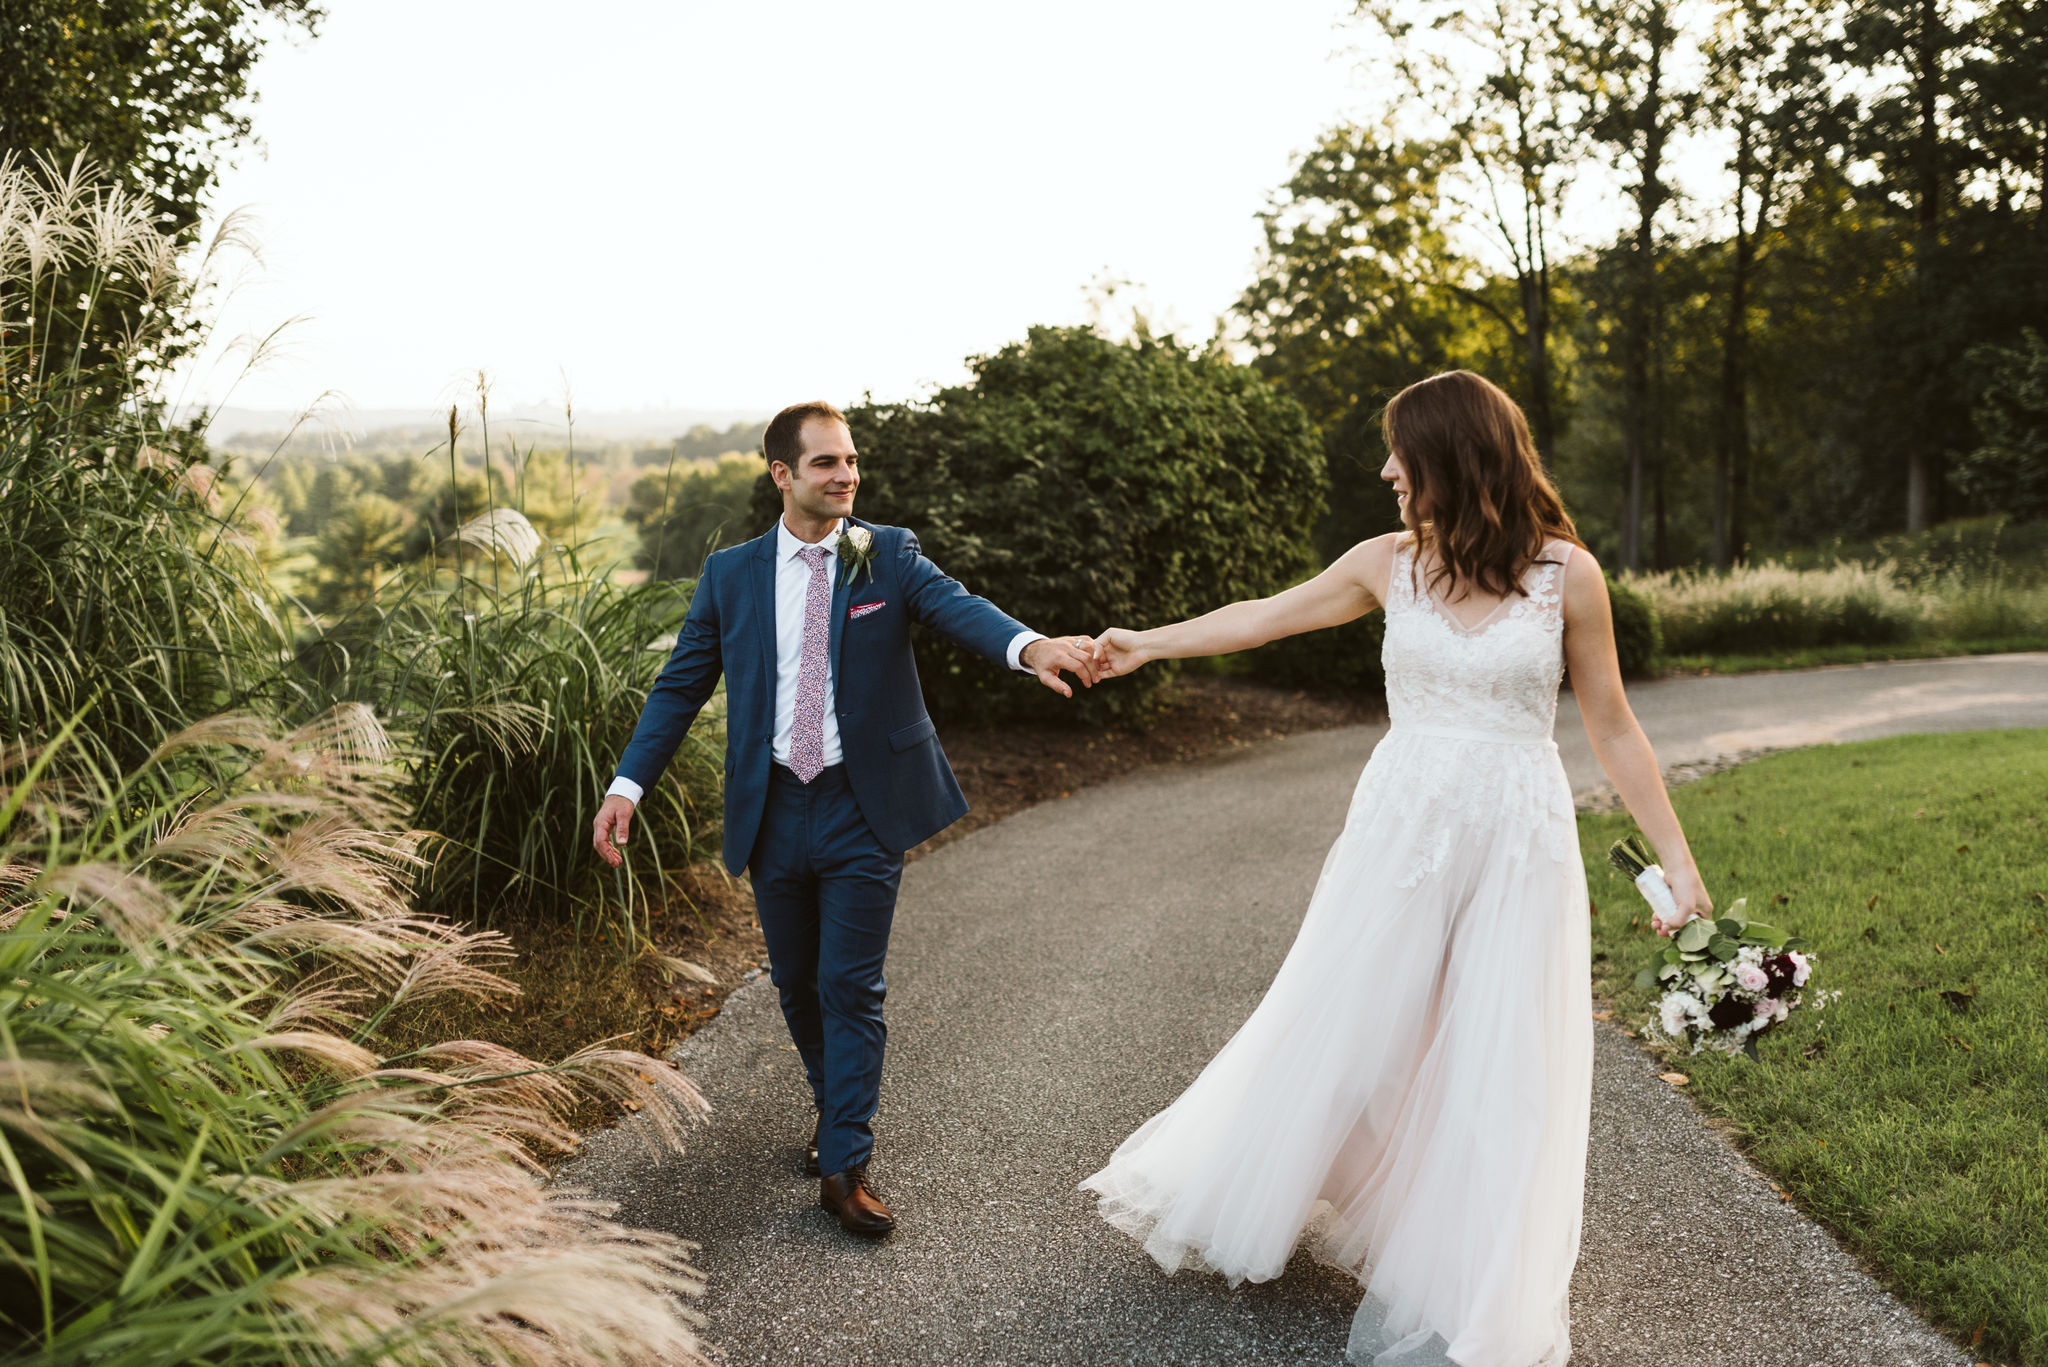  Phoenix Maryland, Baltimore Wedding Photographer, Eagle’s Nest Country Club, Classic, Romantic, Couple Holding Hands on Nature Path, BHLDN Dress, Blue Suit from Generation Tux 